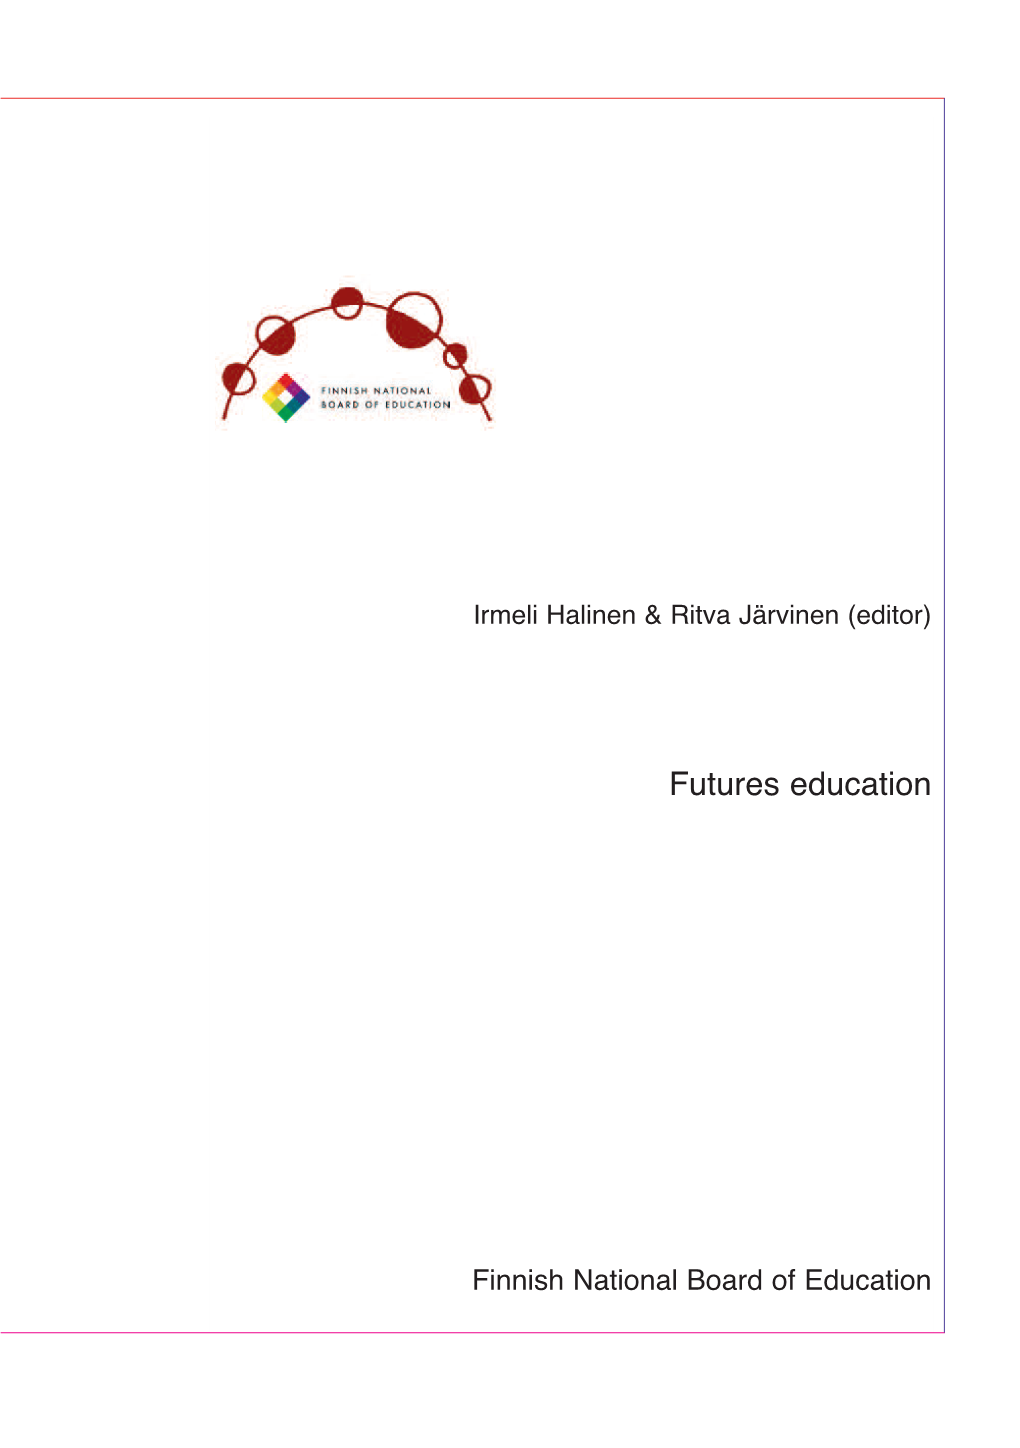 The Conception of Futures Education Crys - Tallized and Got a Concrete Shape, Which Is Described in Dsection 1.3